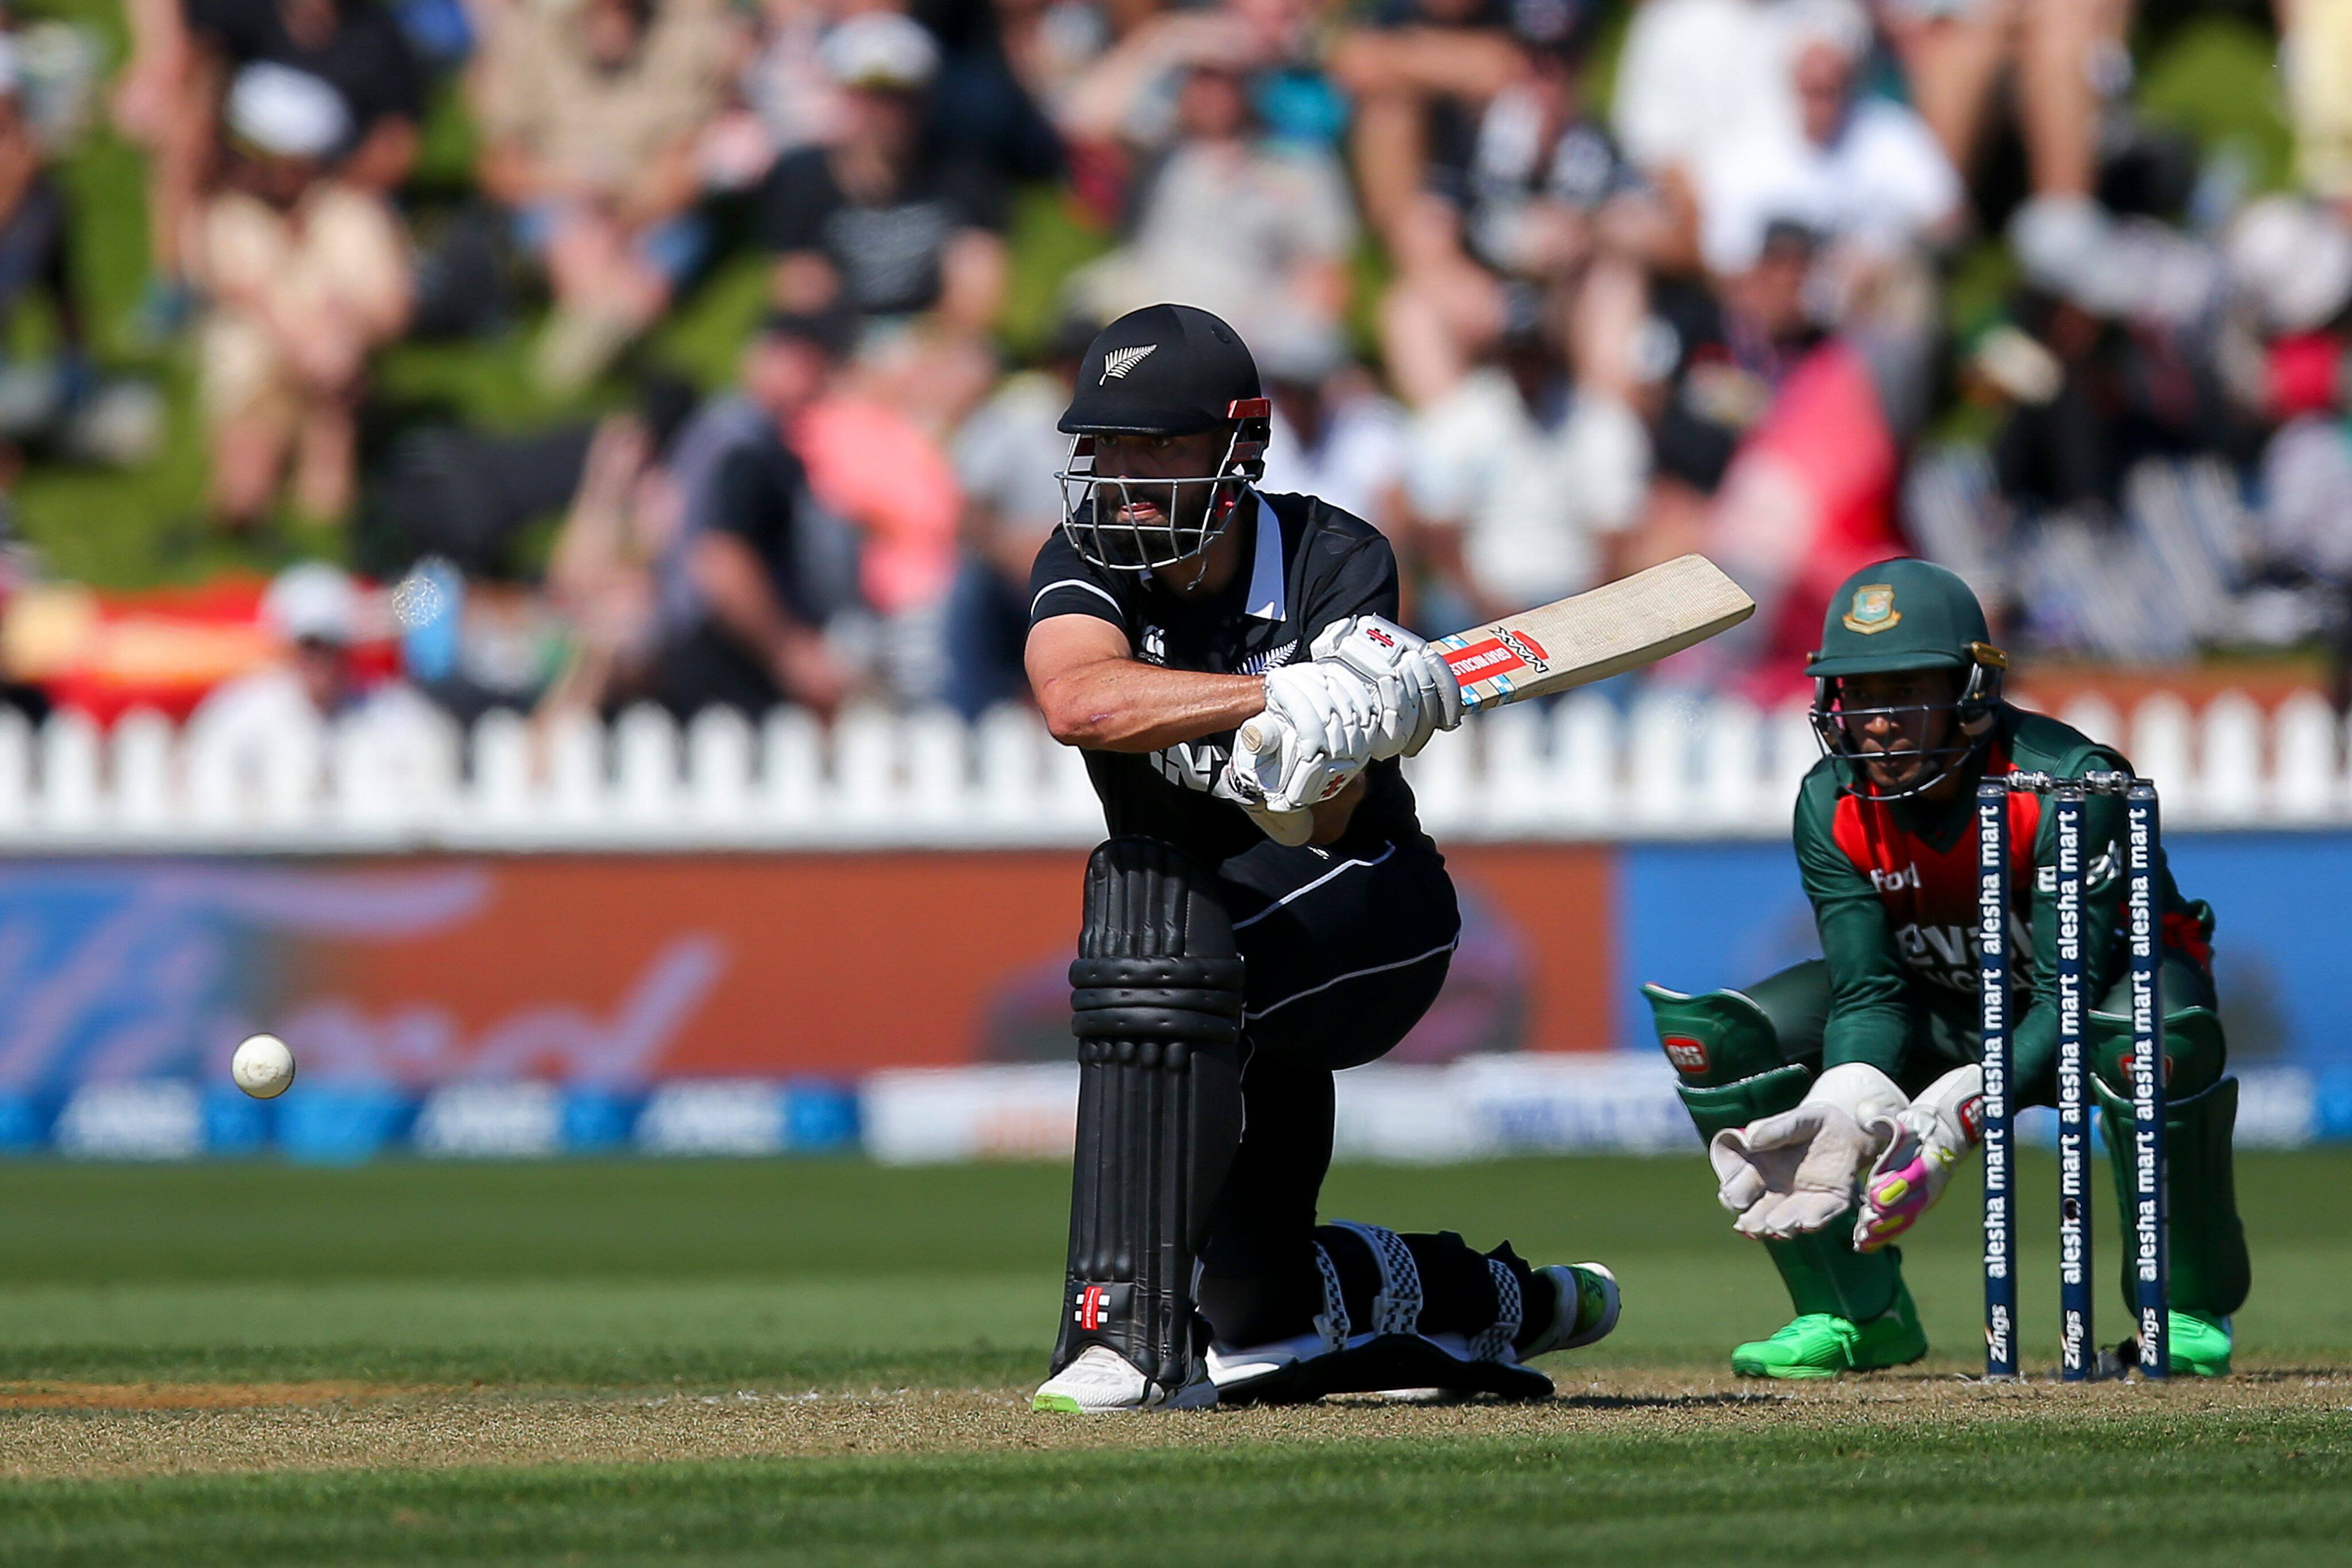 New Zealand all-rounder Daryl Mitchell goes for a reverse sweep on his way to scoring a first hundred in ODIs against Bangladesh in Wellington. (Source: Twitter)